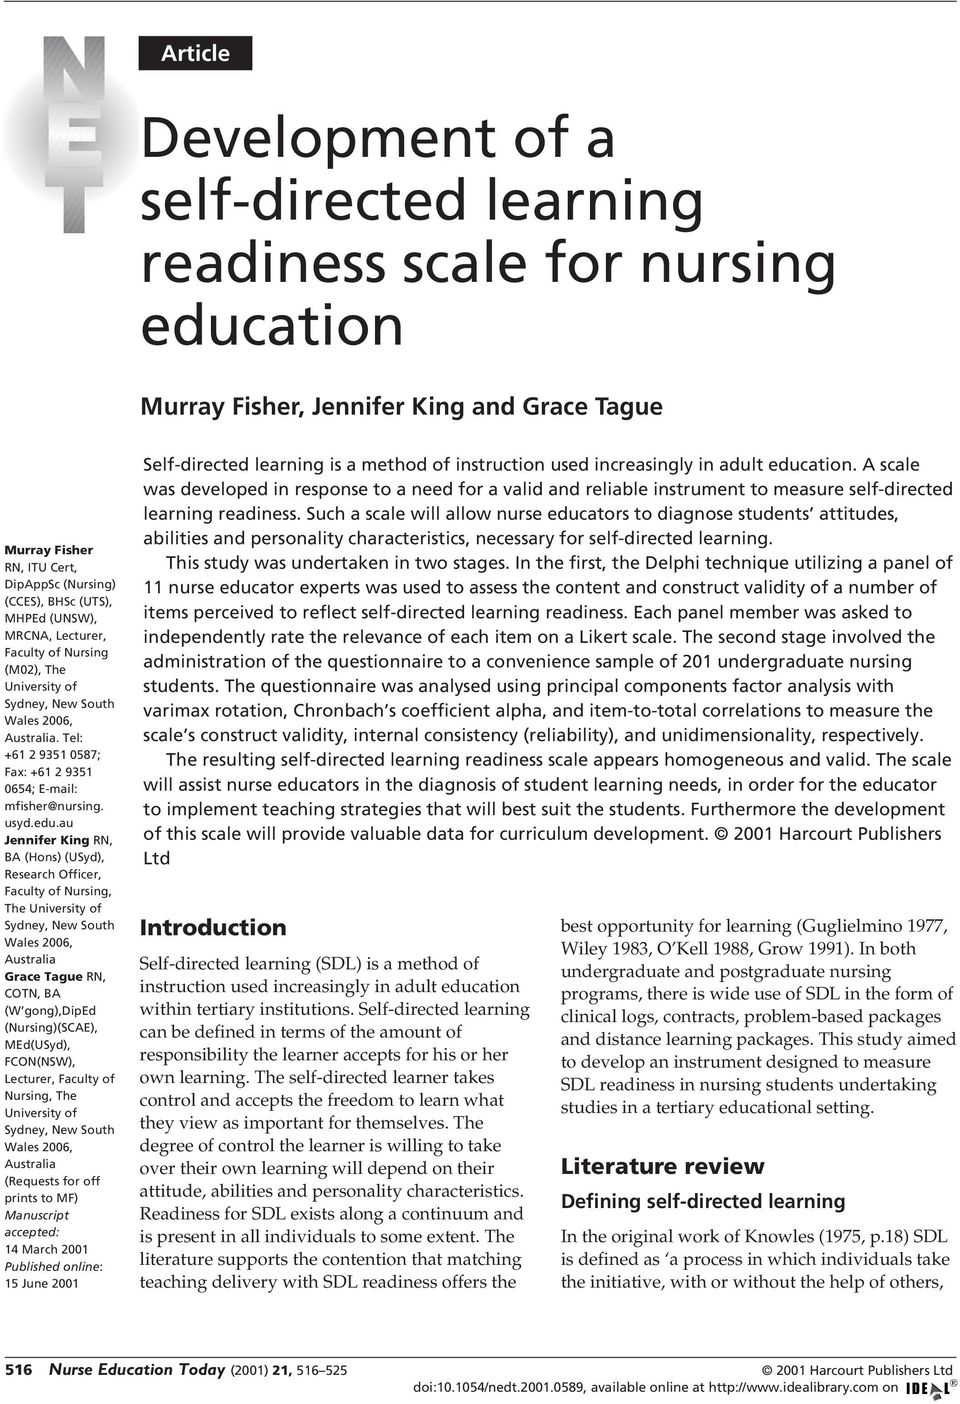 au Jennifer King RN, BA (Hons) (USyd), Research Officer, Faculty of Nursing, The University of Sydney, New South Wales 2006, Australia Grace Tague RN, COTN, BA (W gong),diped (Nursing)(SCAE),